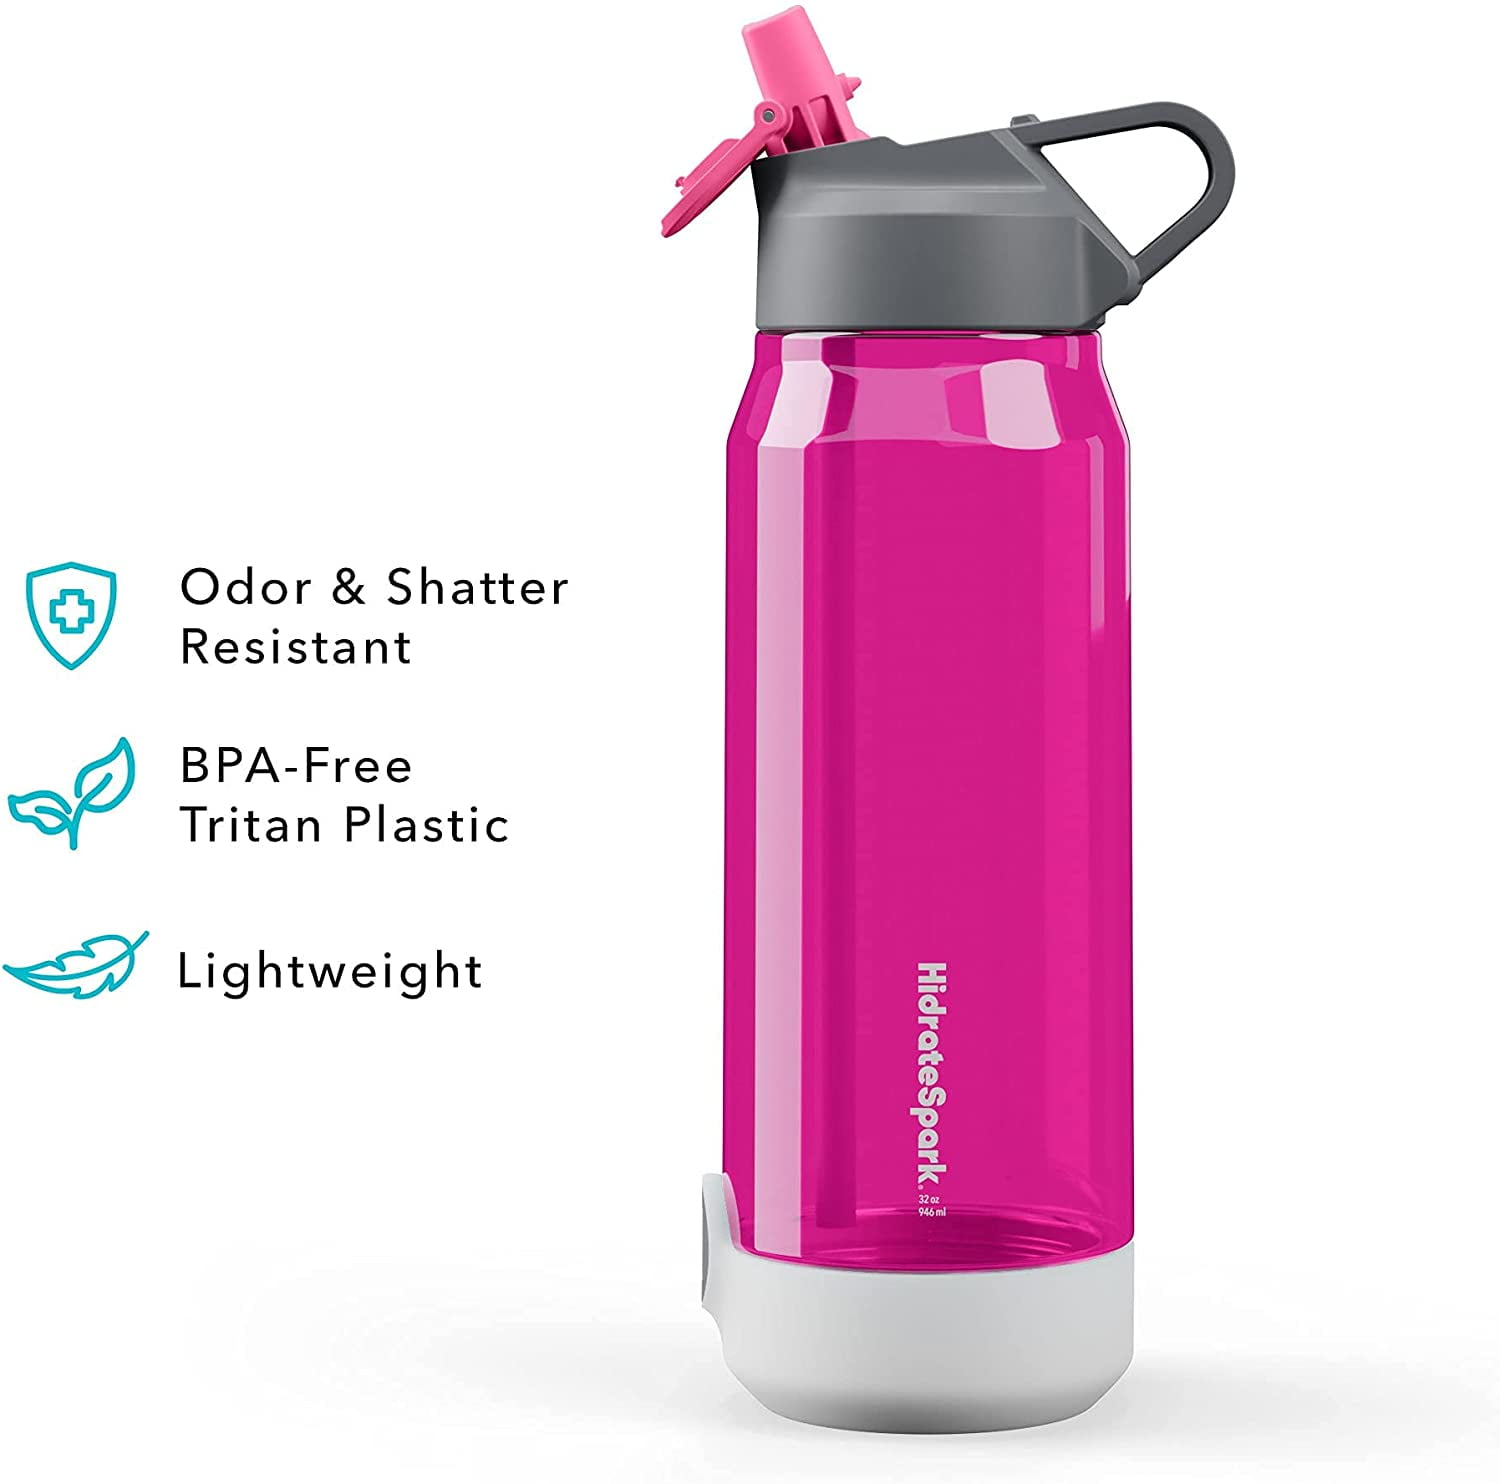 The Hidrate Spark Water Bottle Reminds You to Drink More H2O